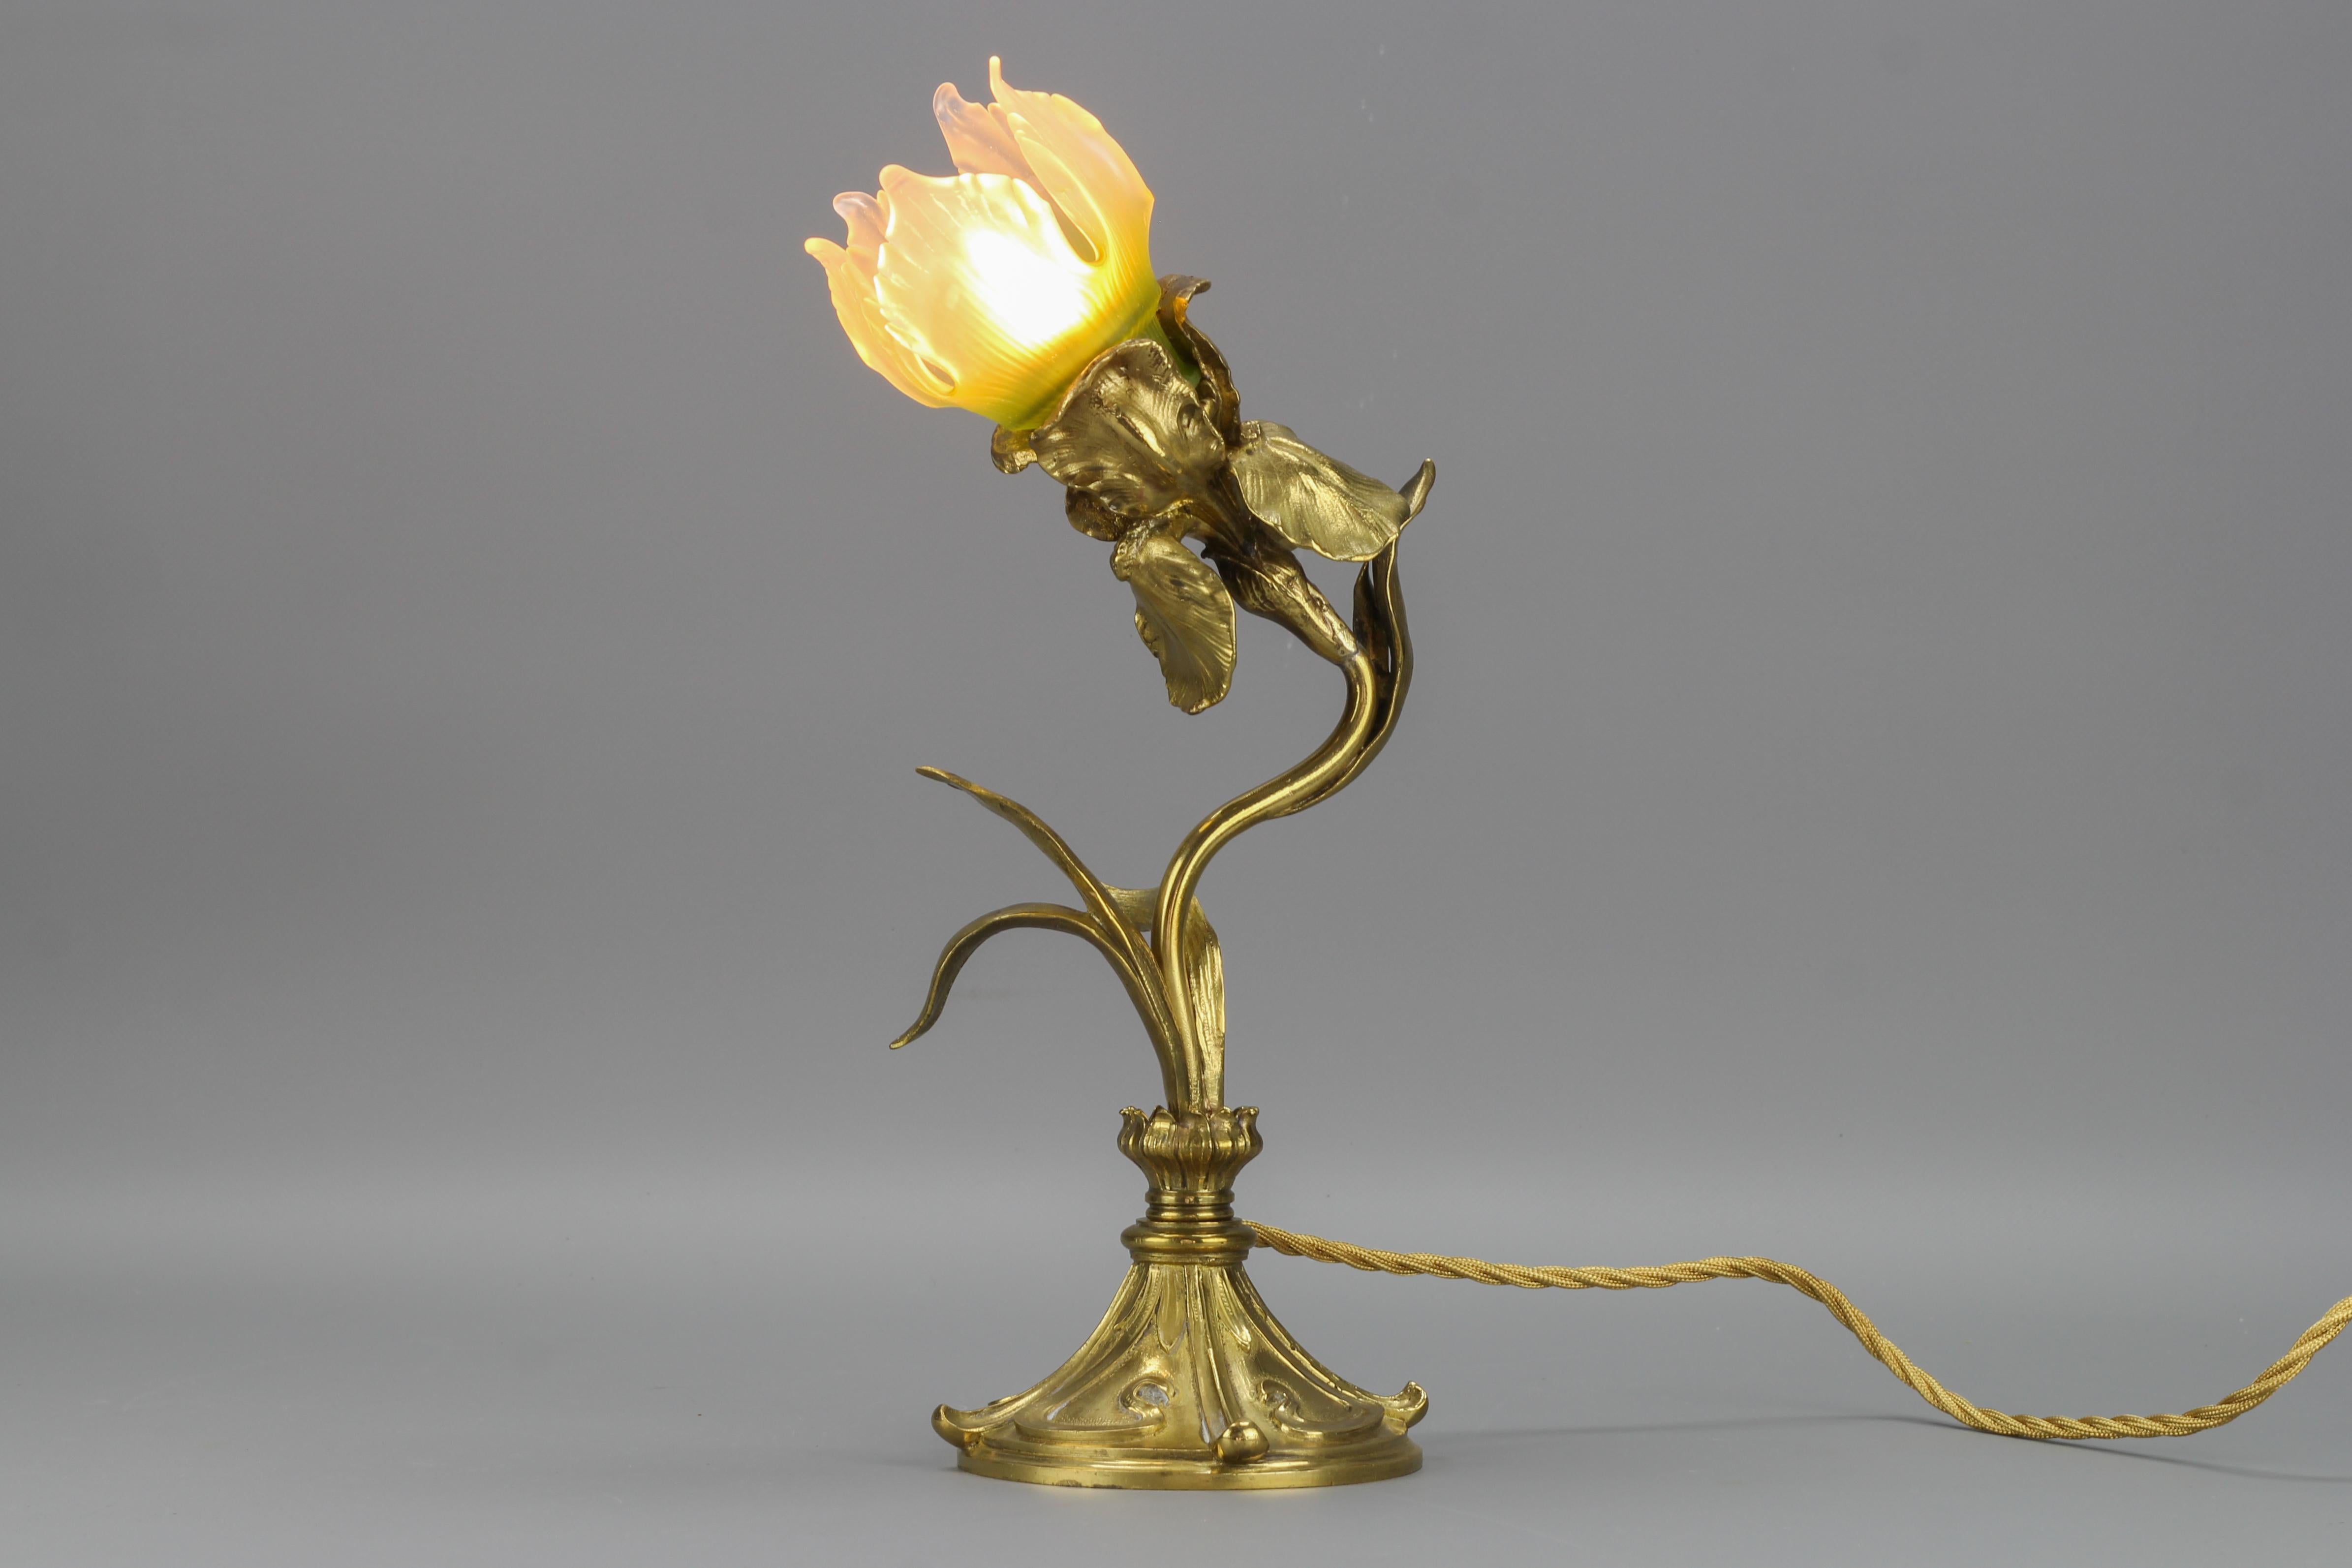 Early 20th Century French Art Nouveau Gilt Bronze and Glass Iris-Shaped Table Lamp